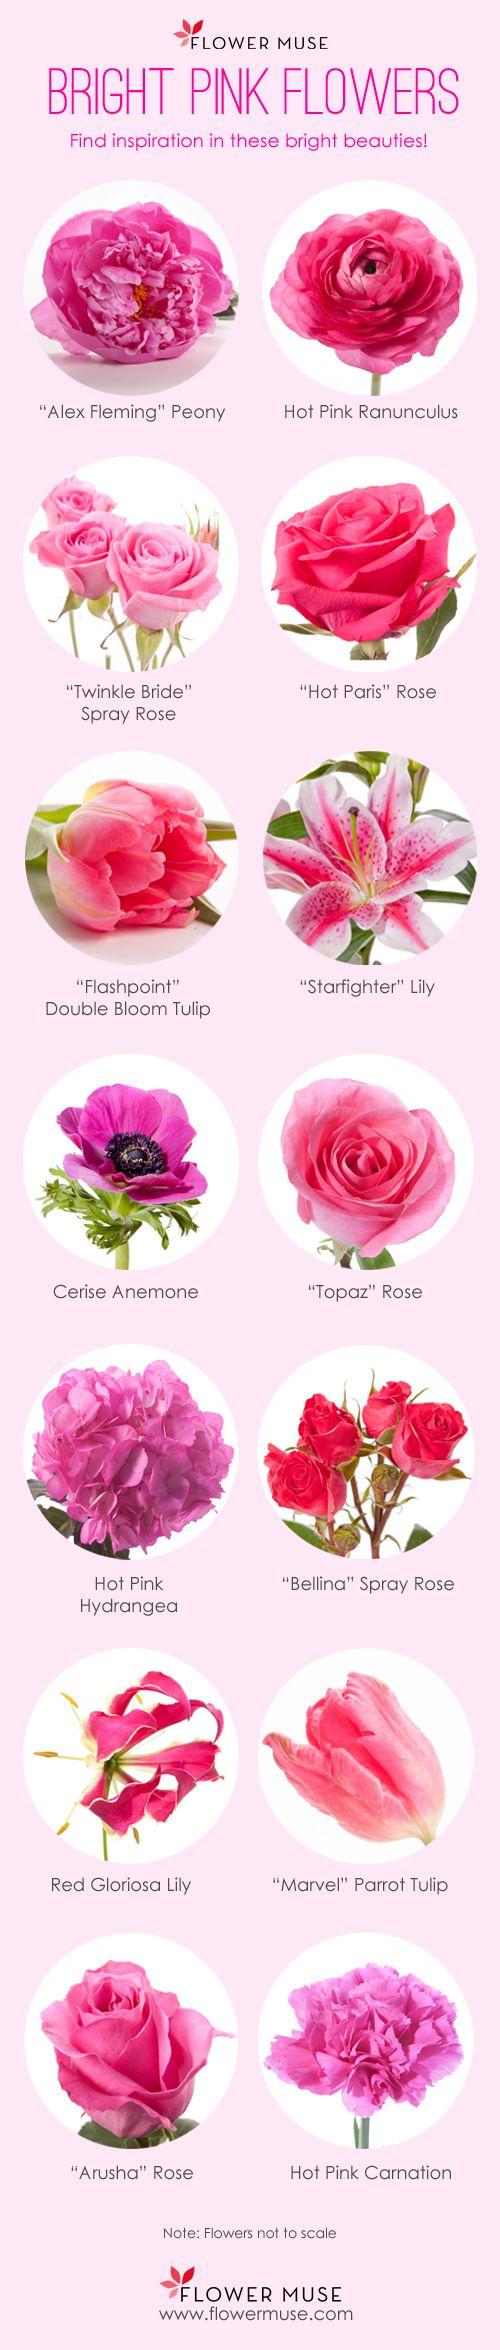 Wedding - Our Favorite: Bright Pink Flowers - Flower Muse Blog